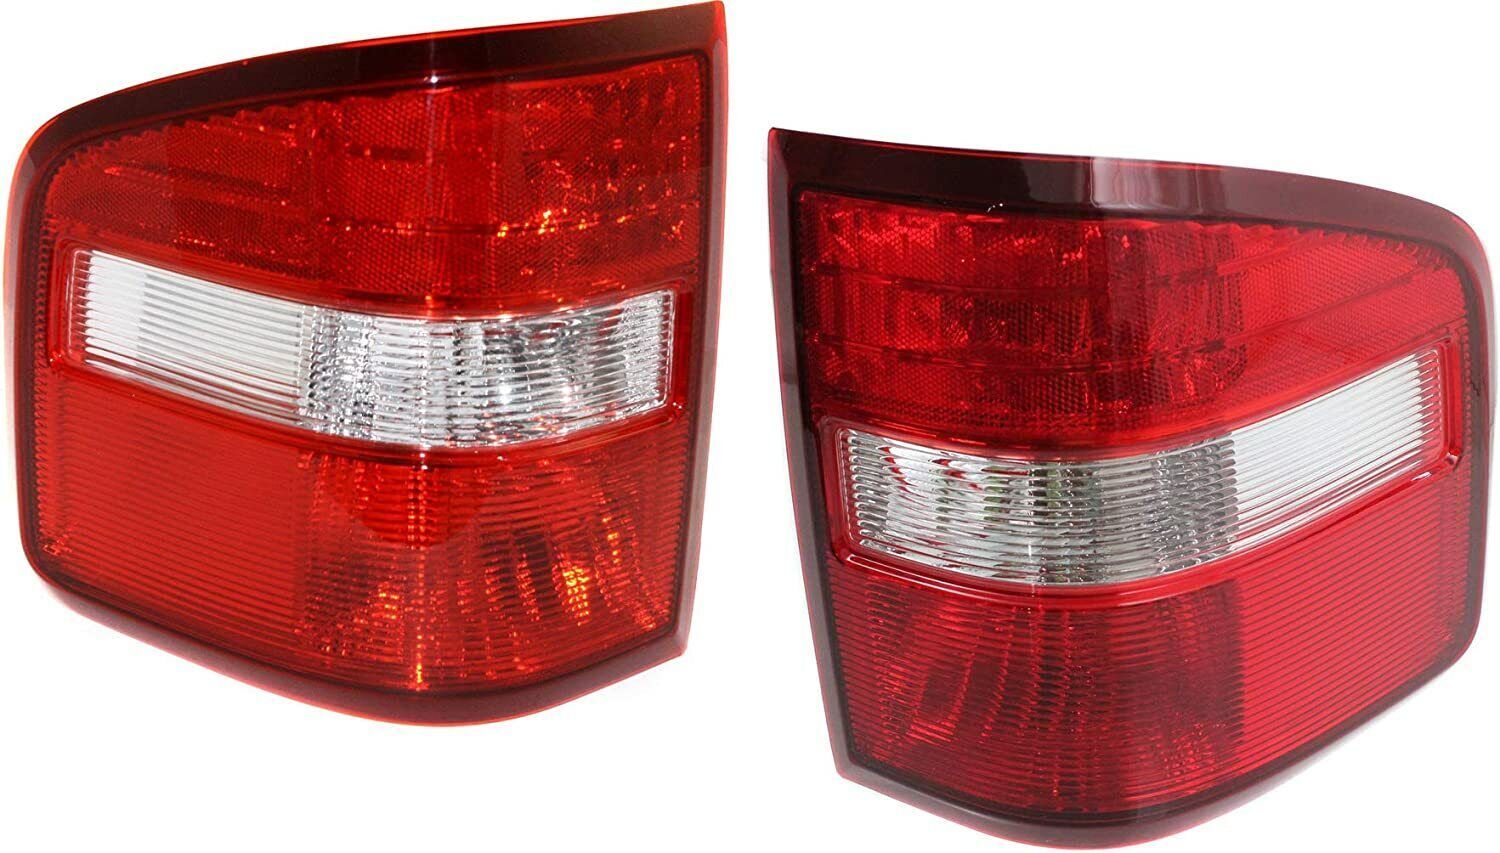 Primary image for Tail Lights For Ford F150 Truck 2005 2006 2007 2008 2009 Flairside Pair 